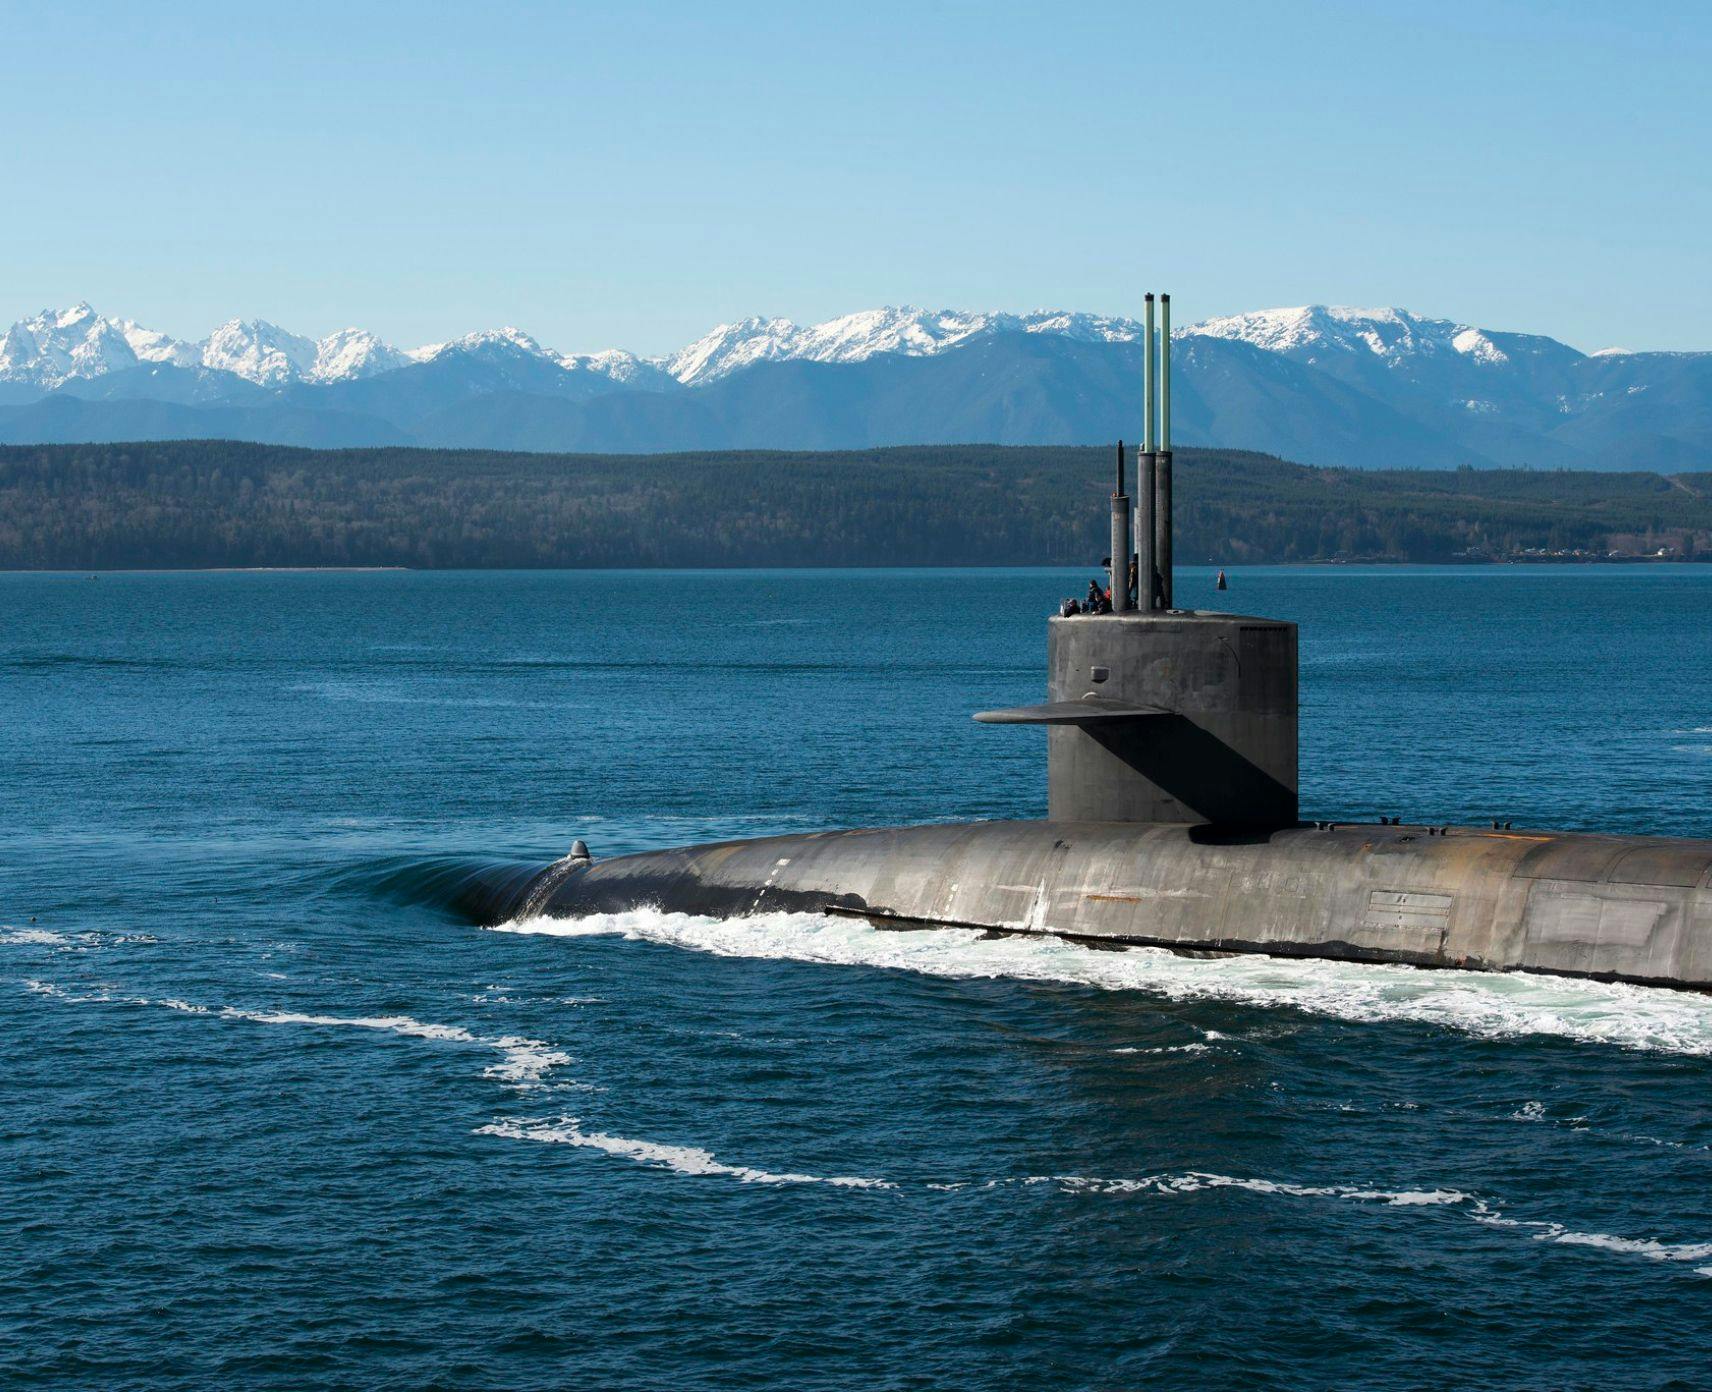 United States submarine returning to port with snow-capped mountains in the background.